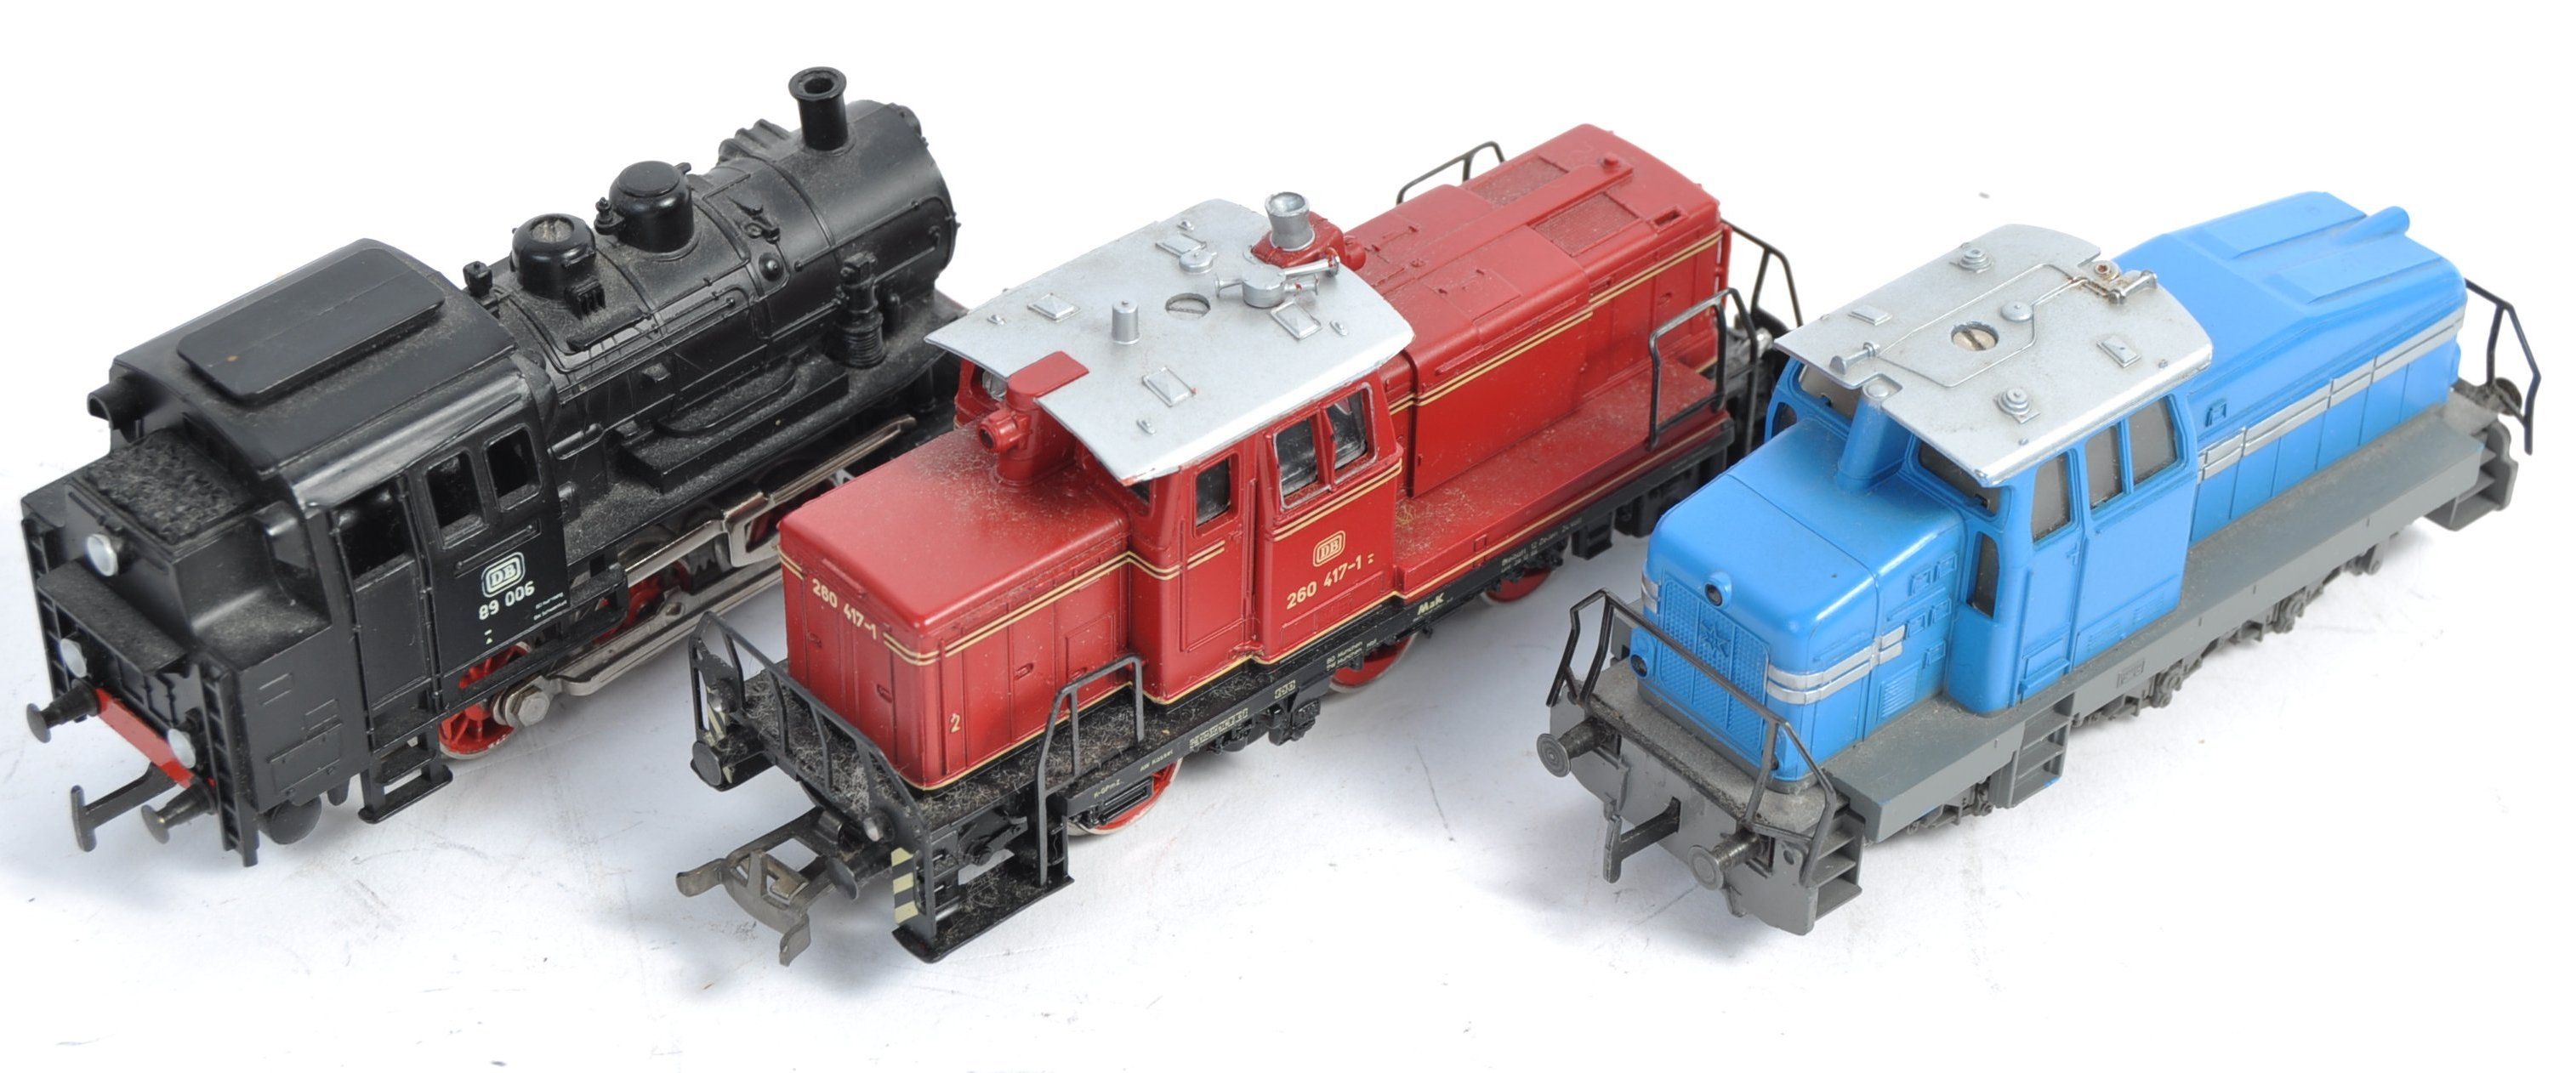 COLLECTION OF MARKLIN LOCOMOTIVE ENGINES - Image 3 of 7